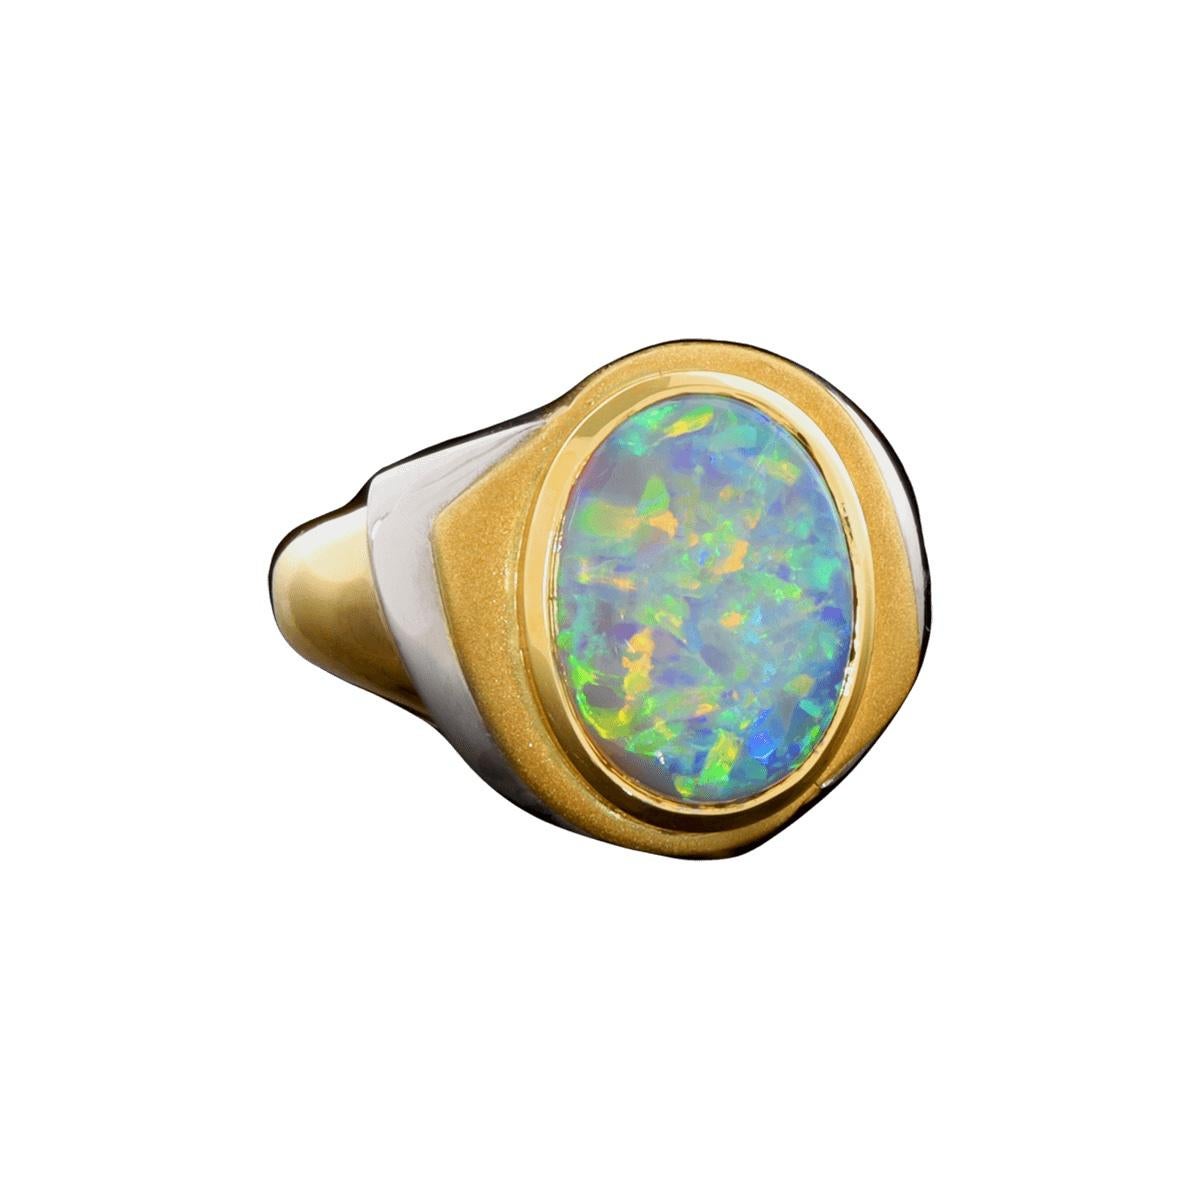 Like a tropical sea, this opal ring sparkles with life. Set in 18K solid gold and platinum, it's a design suitable as everyday wear. The colour play is vibrant and clean with crisp greens and blues and aquas. Don’t forget Australian opal is just as